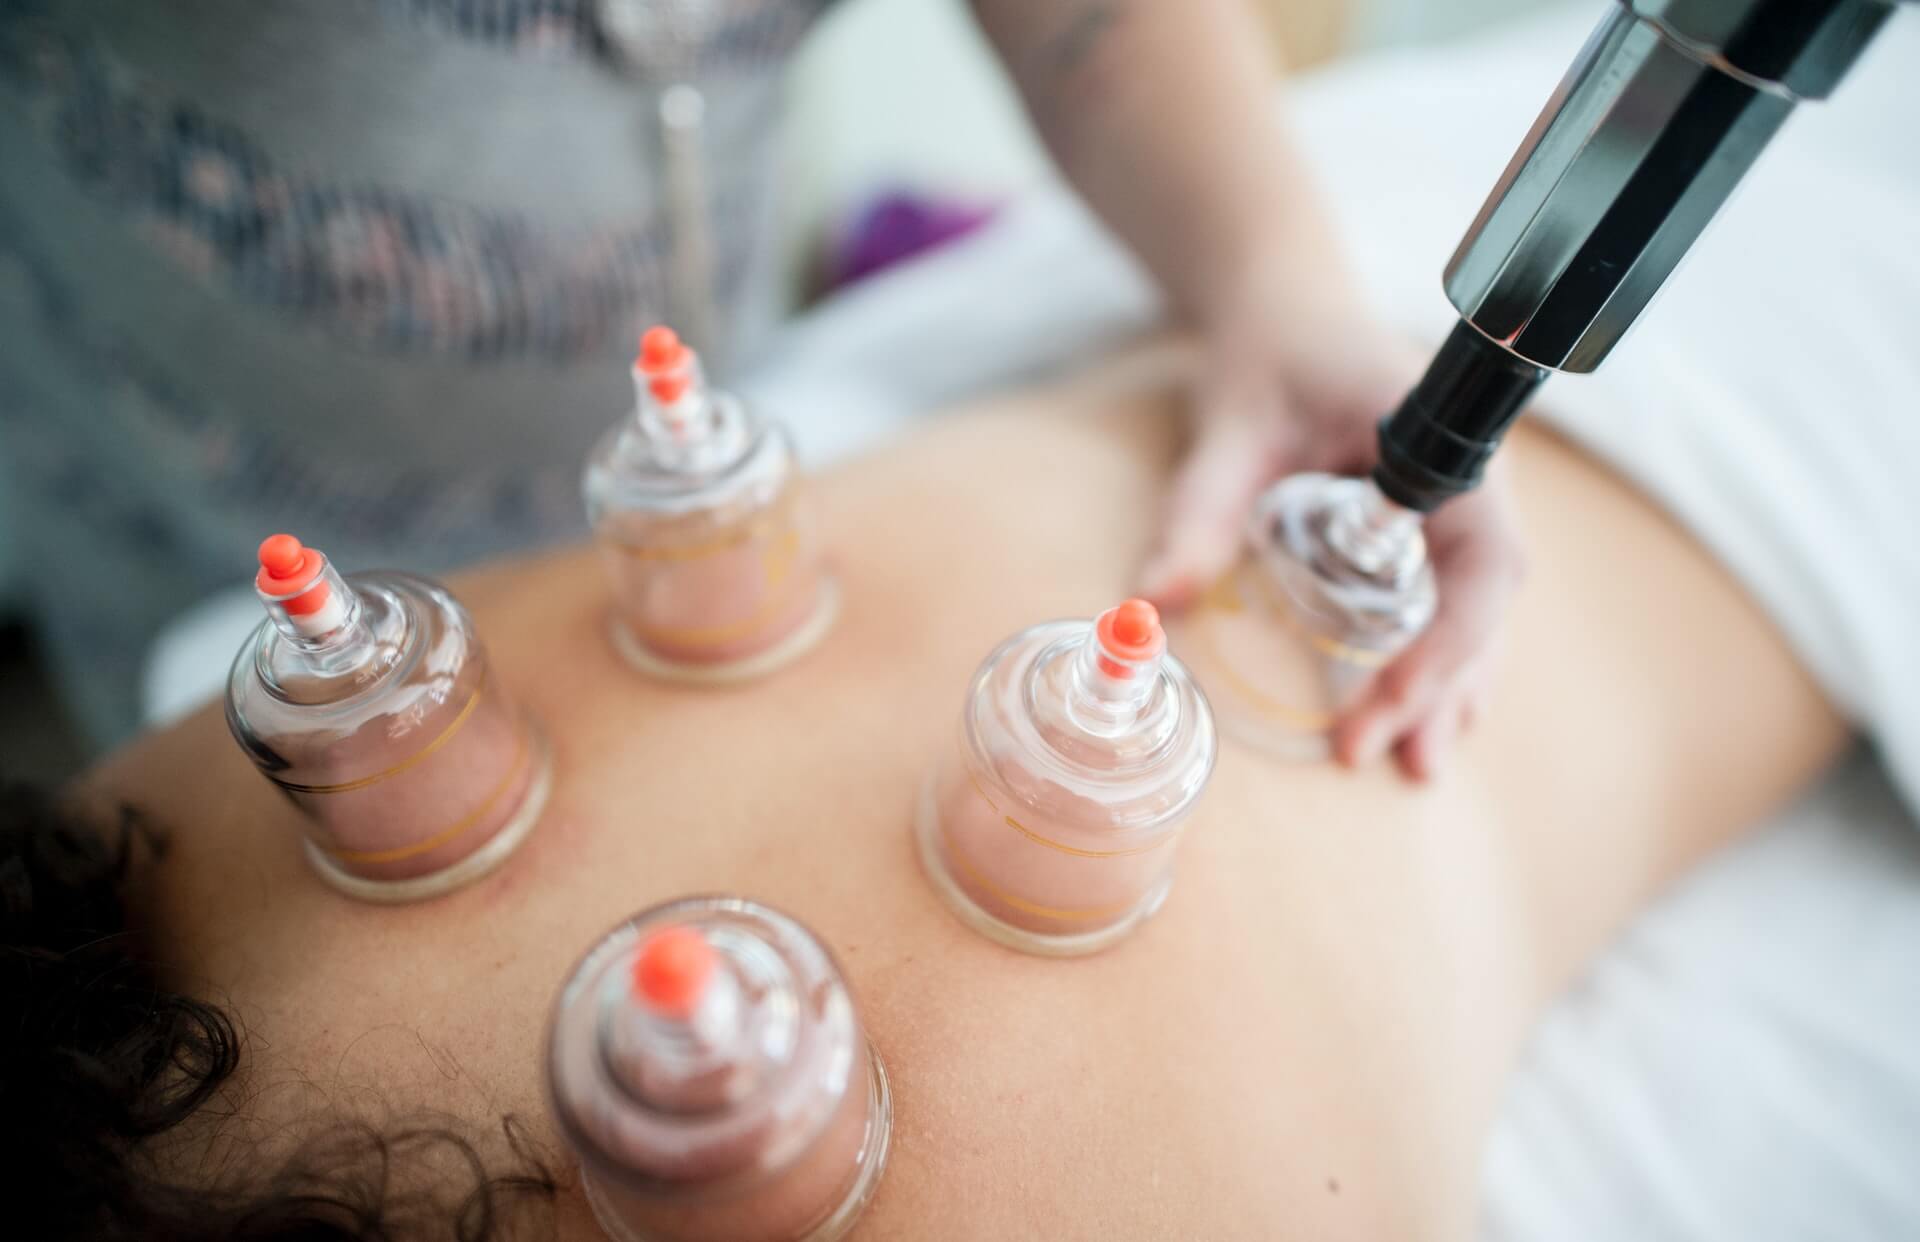 how much does hijama cost